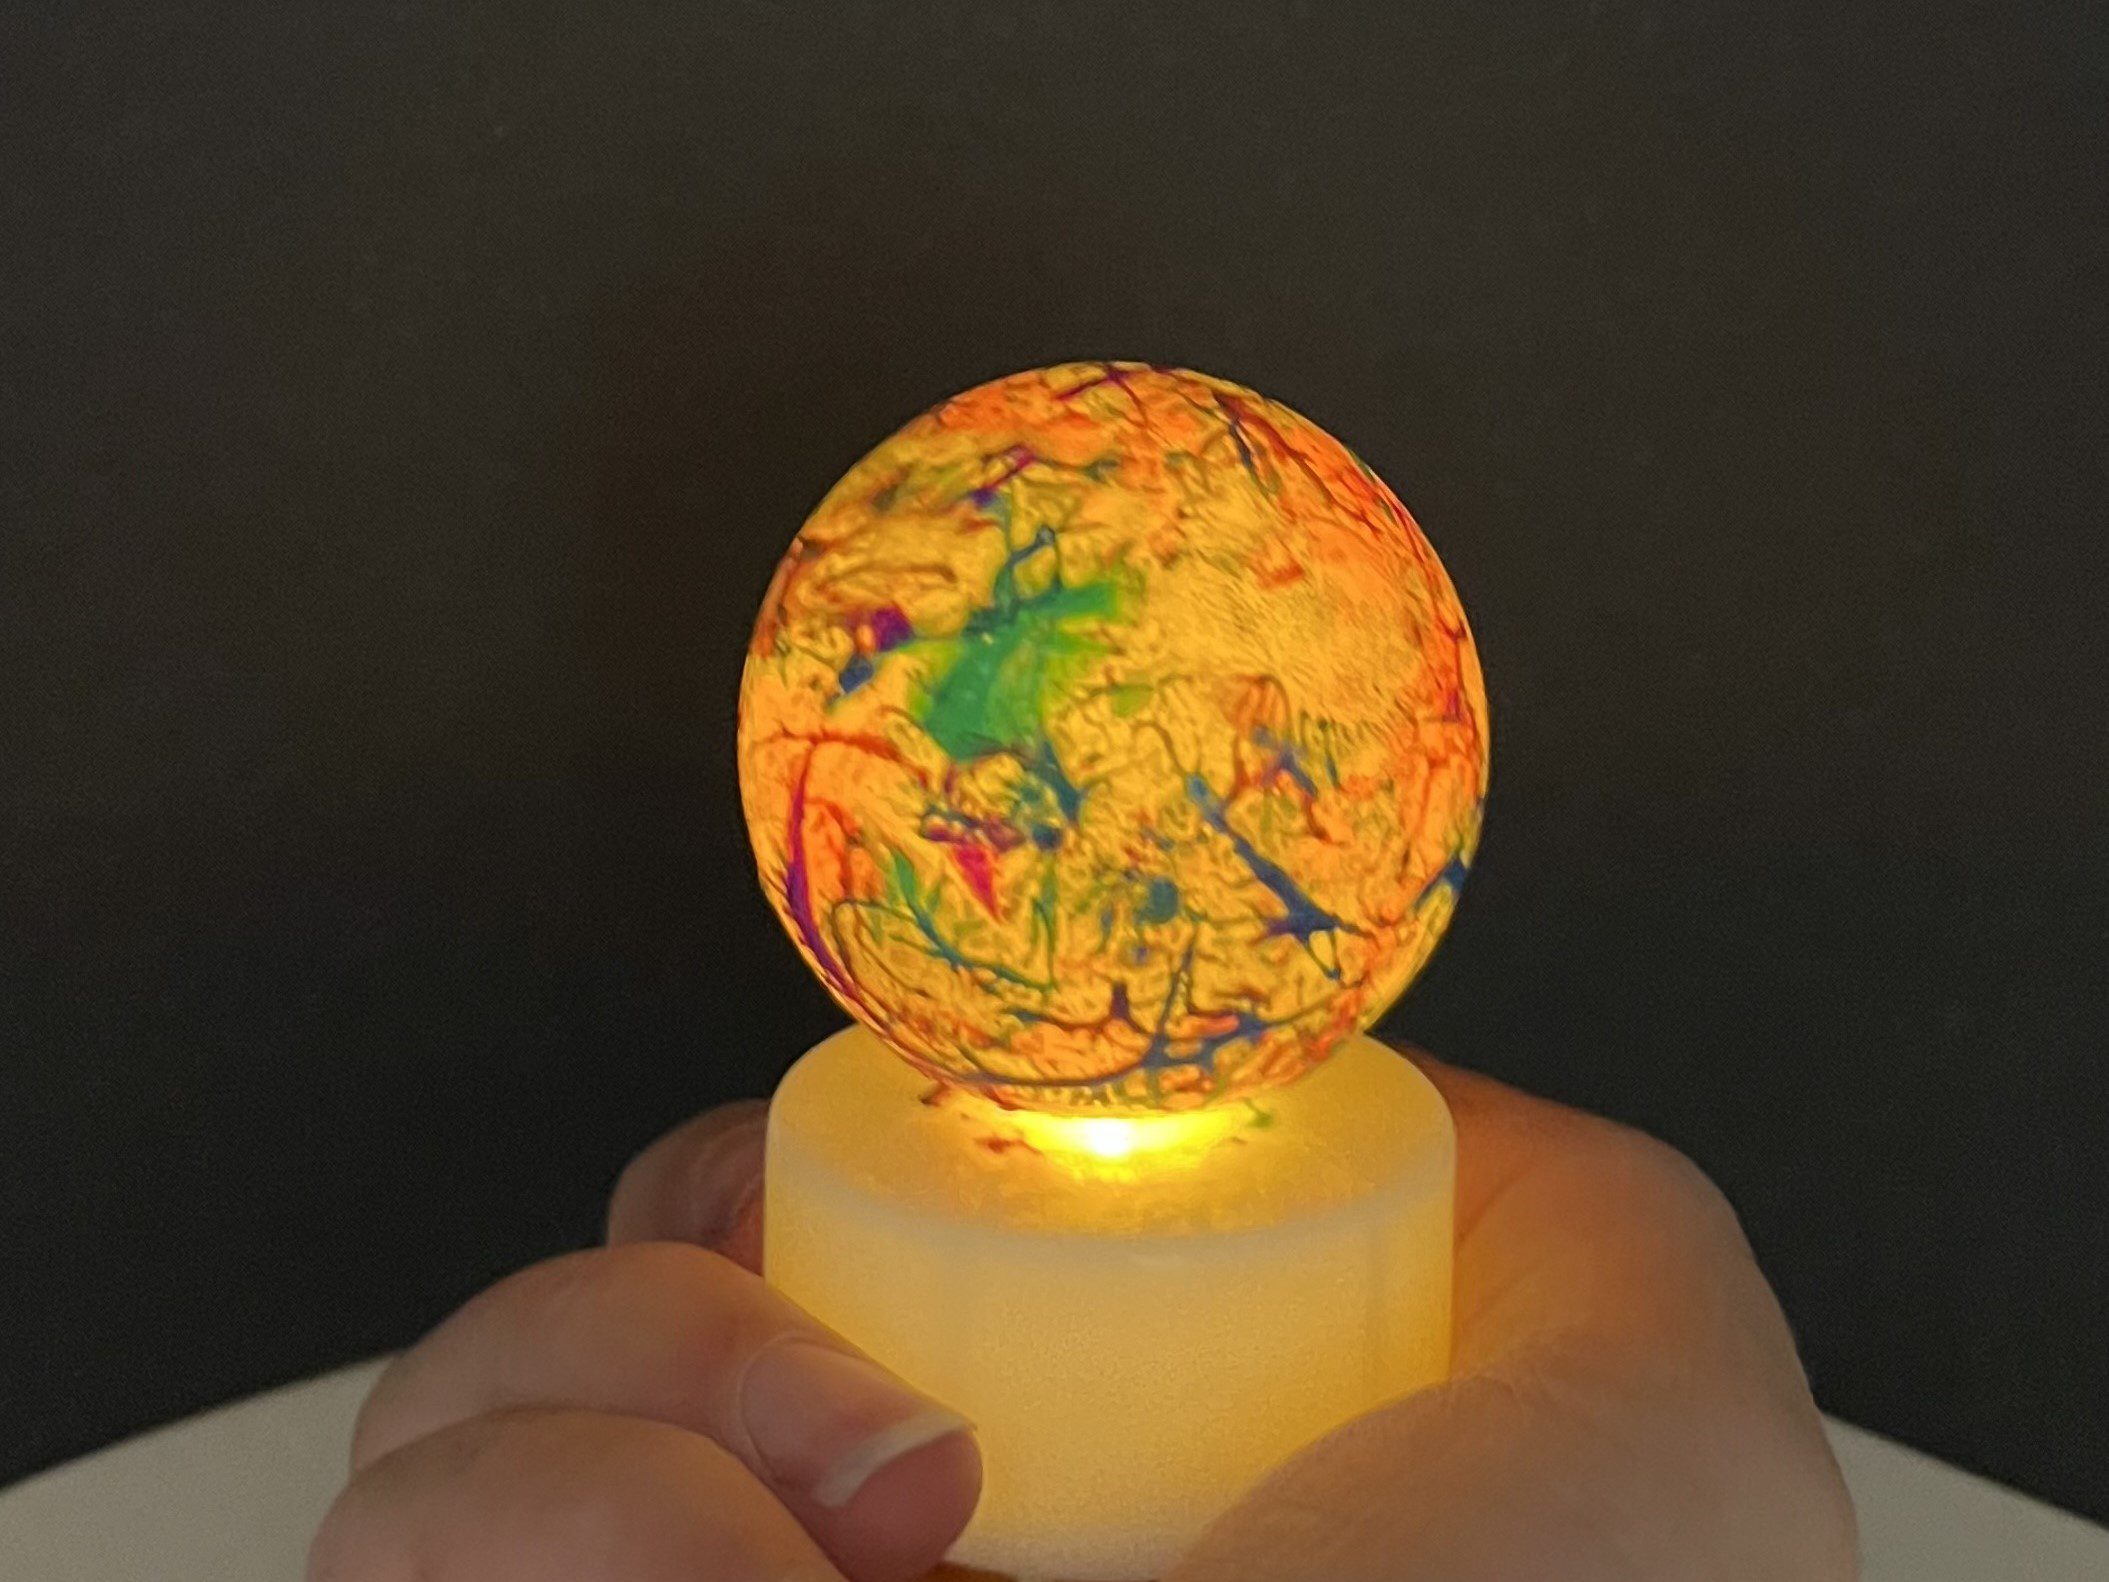 a ball splatter-painted with neon colors in lit from inside with a tealight